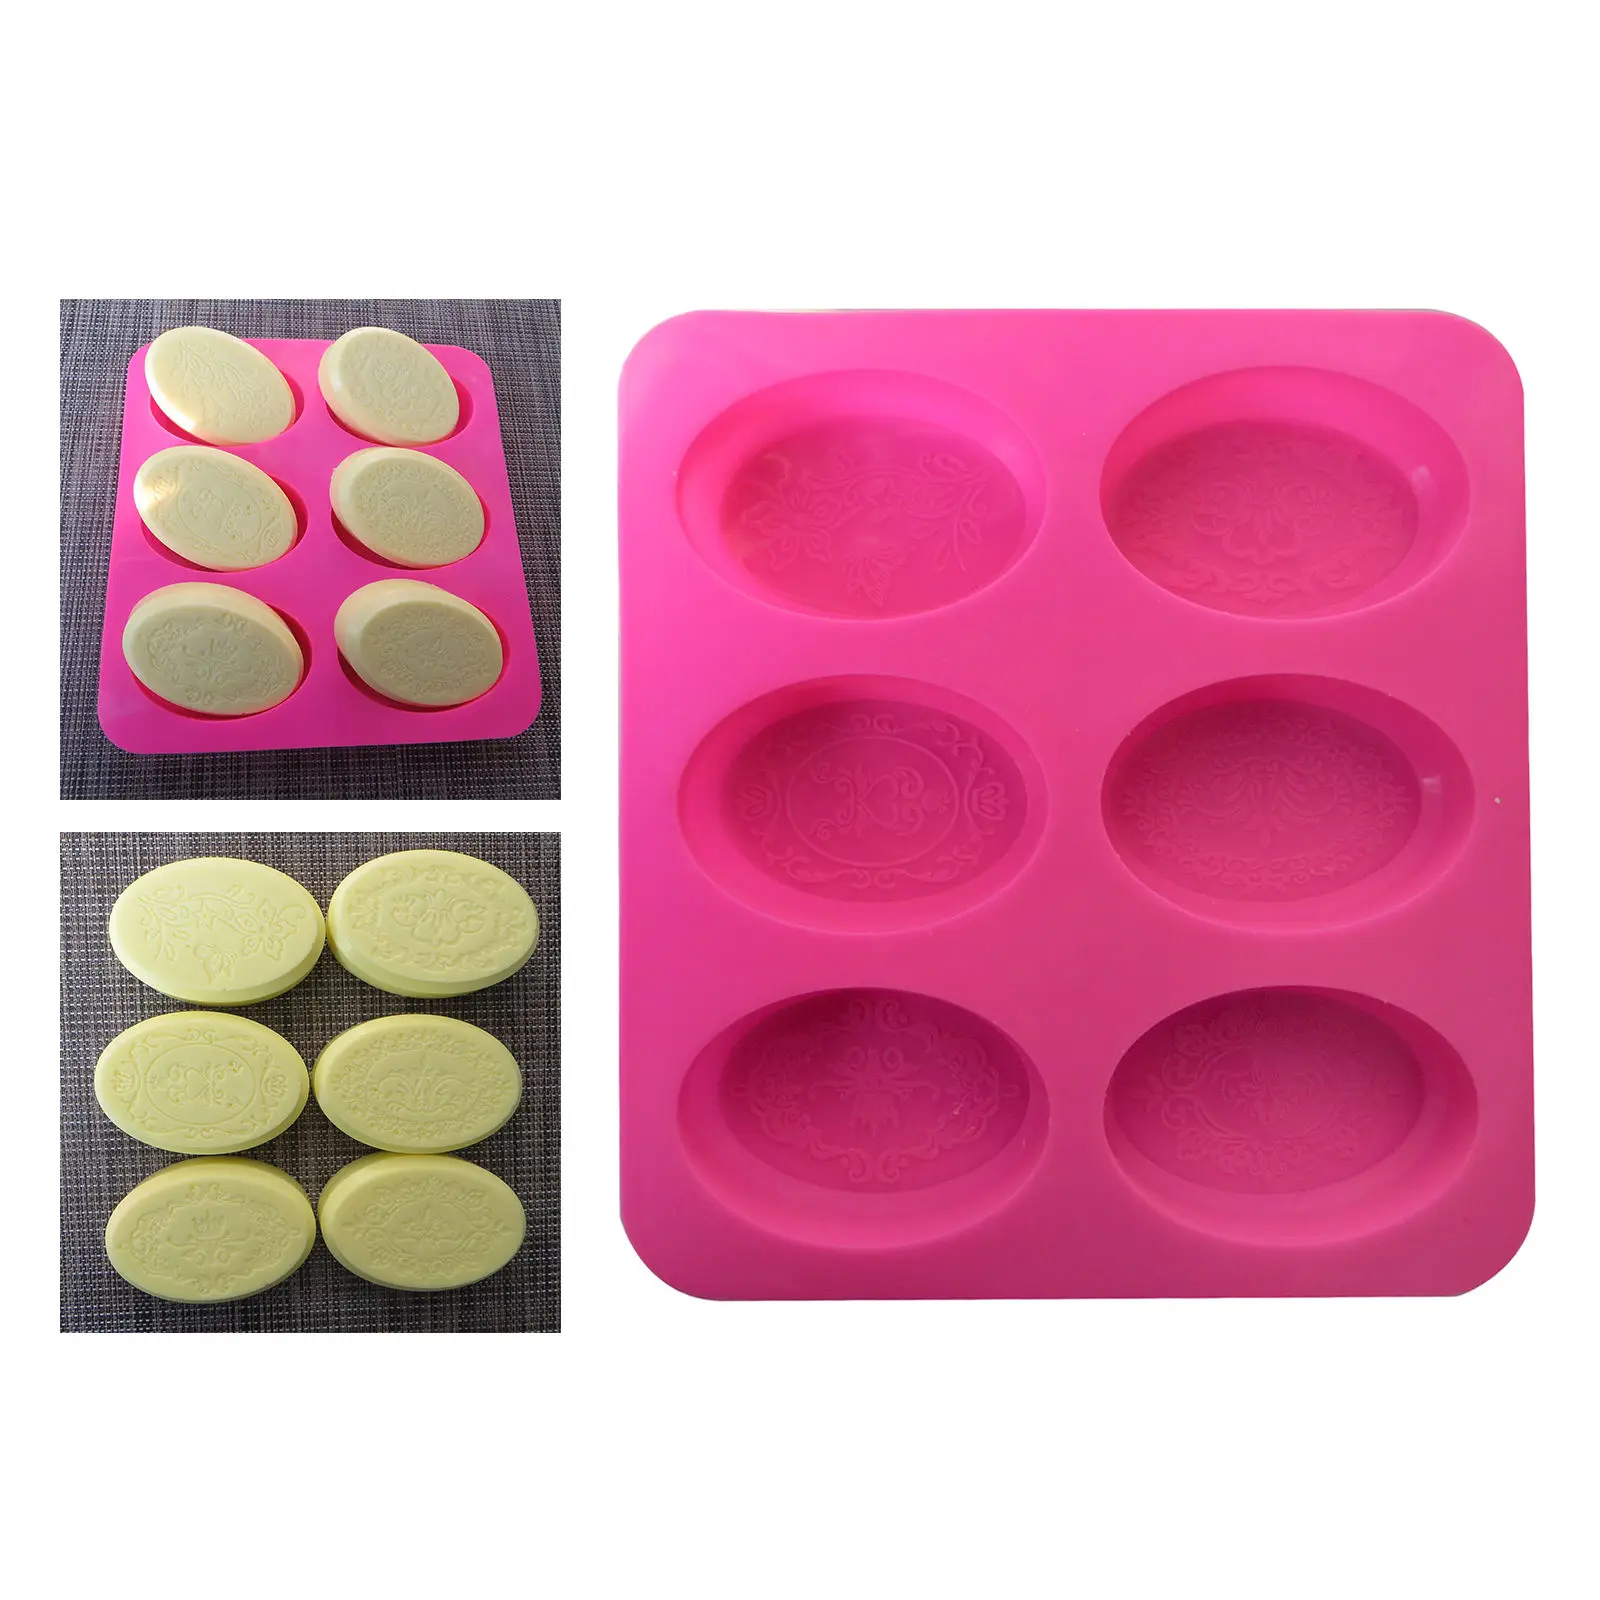 7-Cavity Lace Silicone DIY Epoxy Resin Casting Soap Molds Handmade for Candy Soap Candle Chocolate Making Supplies